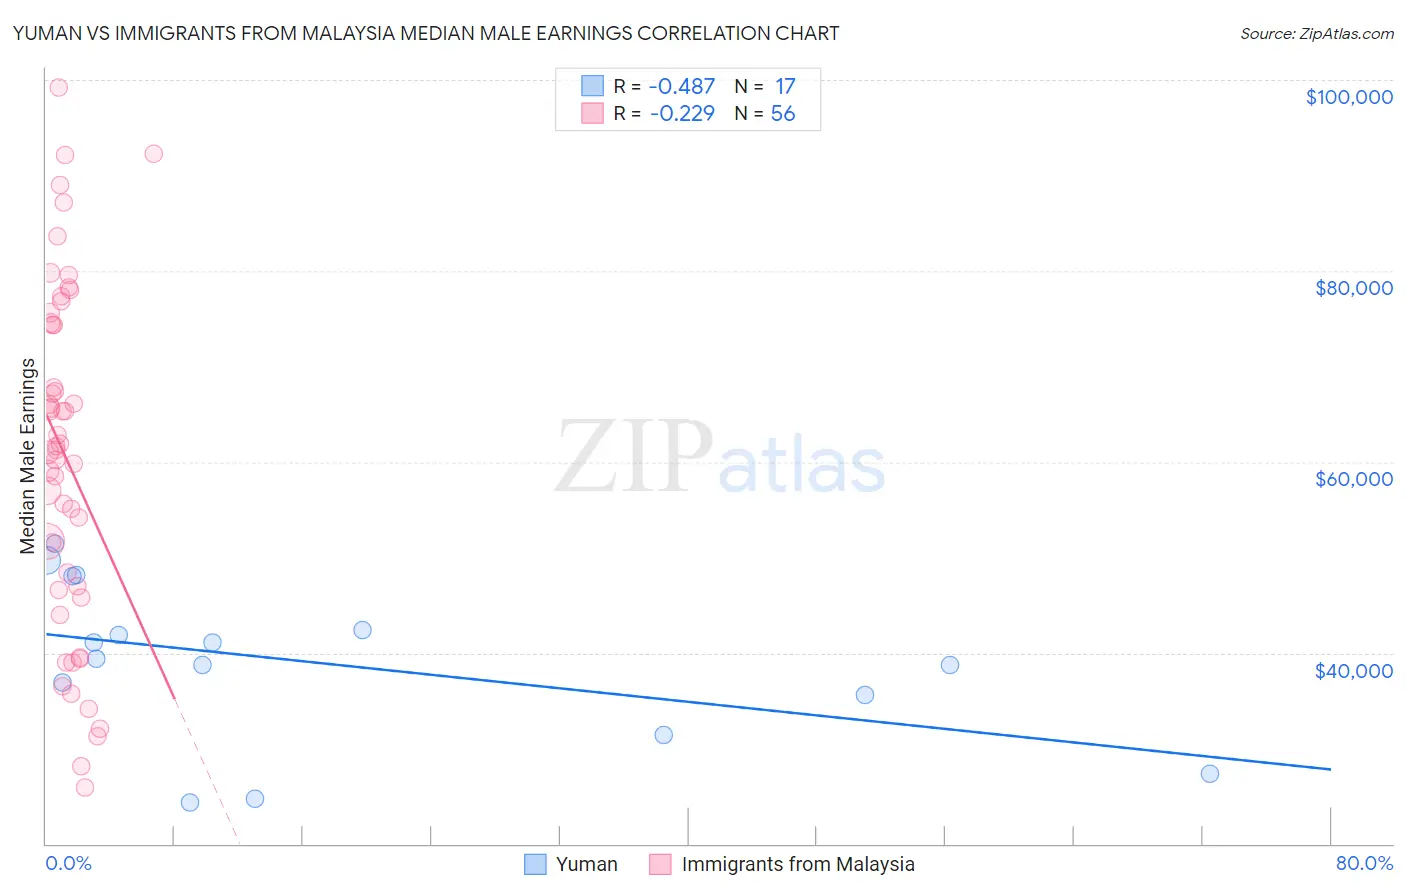 Yuman vs Immigrants from Malaysia Median Male Earnings